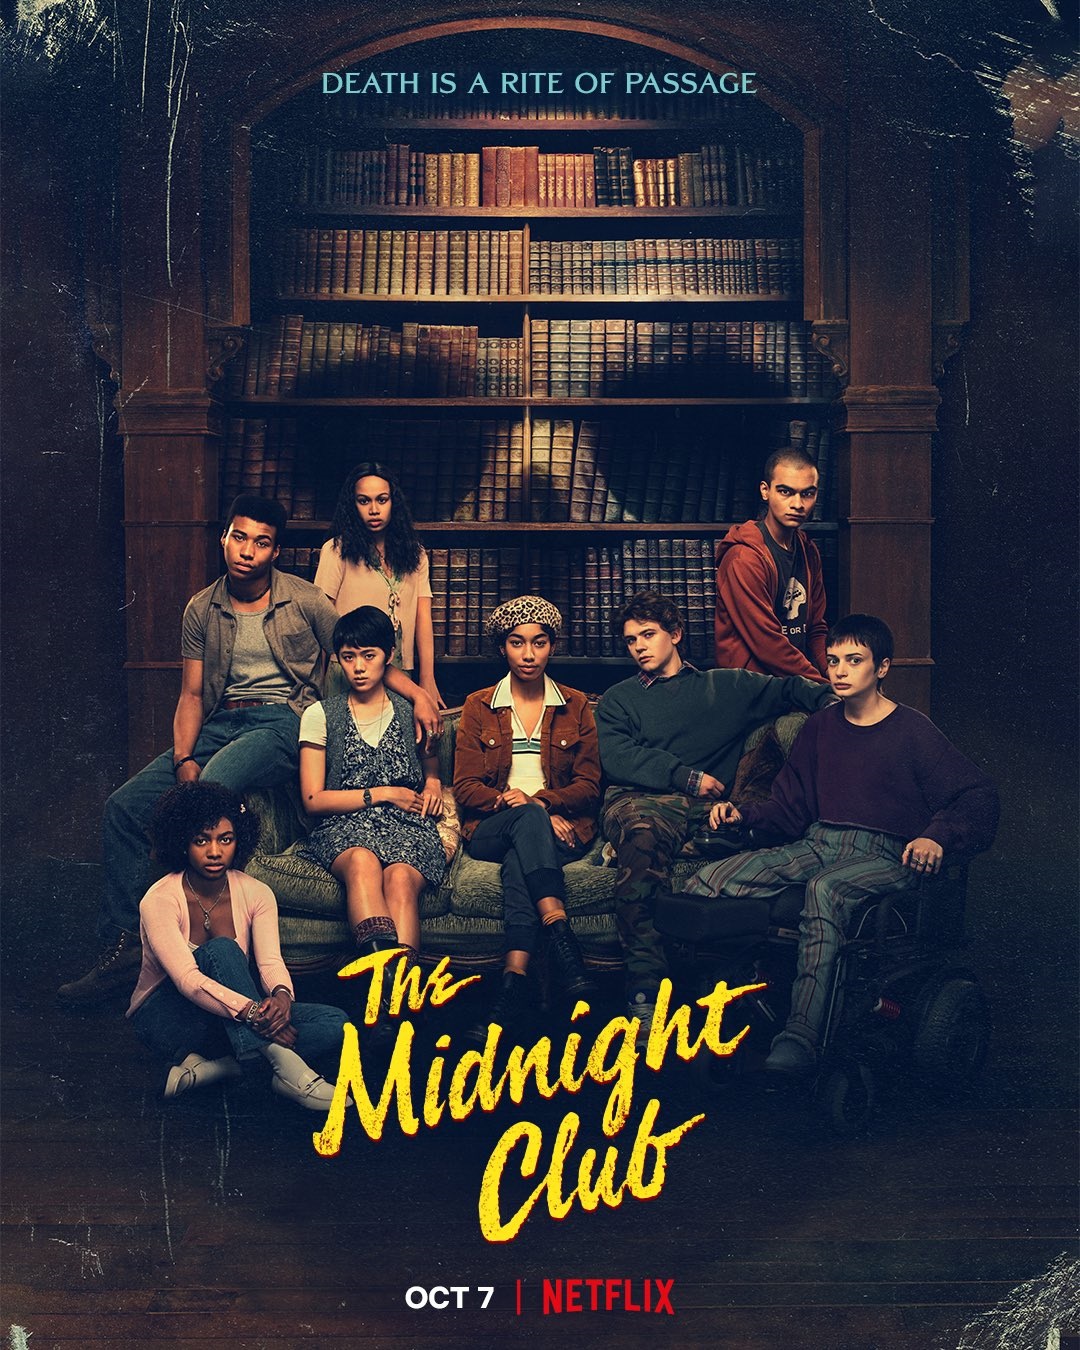 'The Midnight Club' poster. Image: Netflix / Supplied